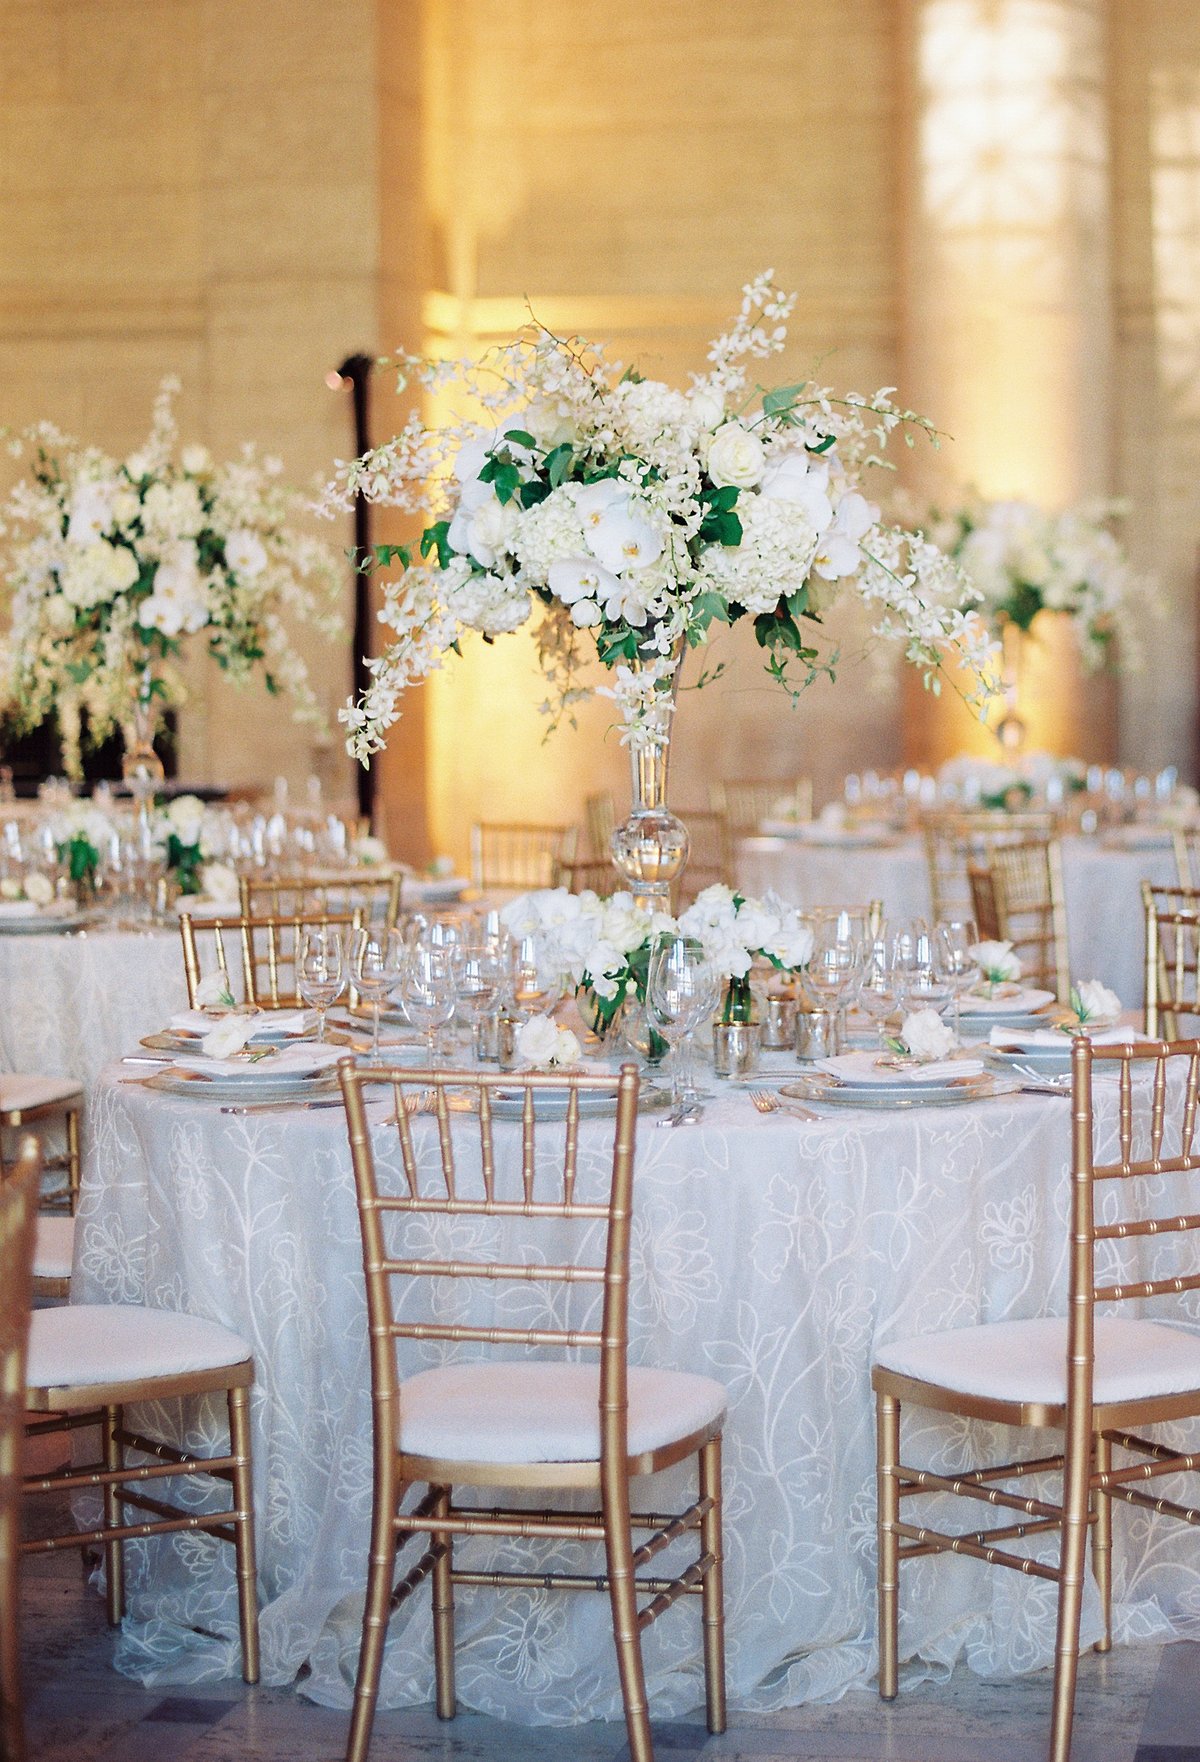 Tablescape for wedding by Jenny Schneider Events at the Asian Art Museum in San Francisco, California. Photo by Lori Paladino Photography.